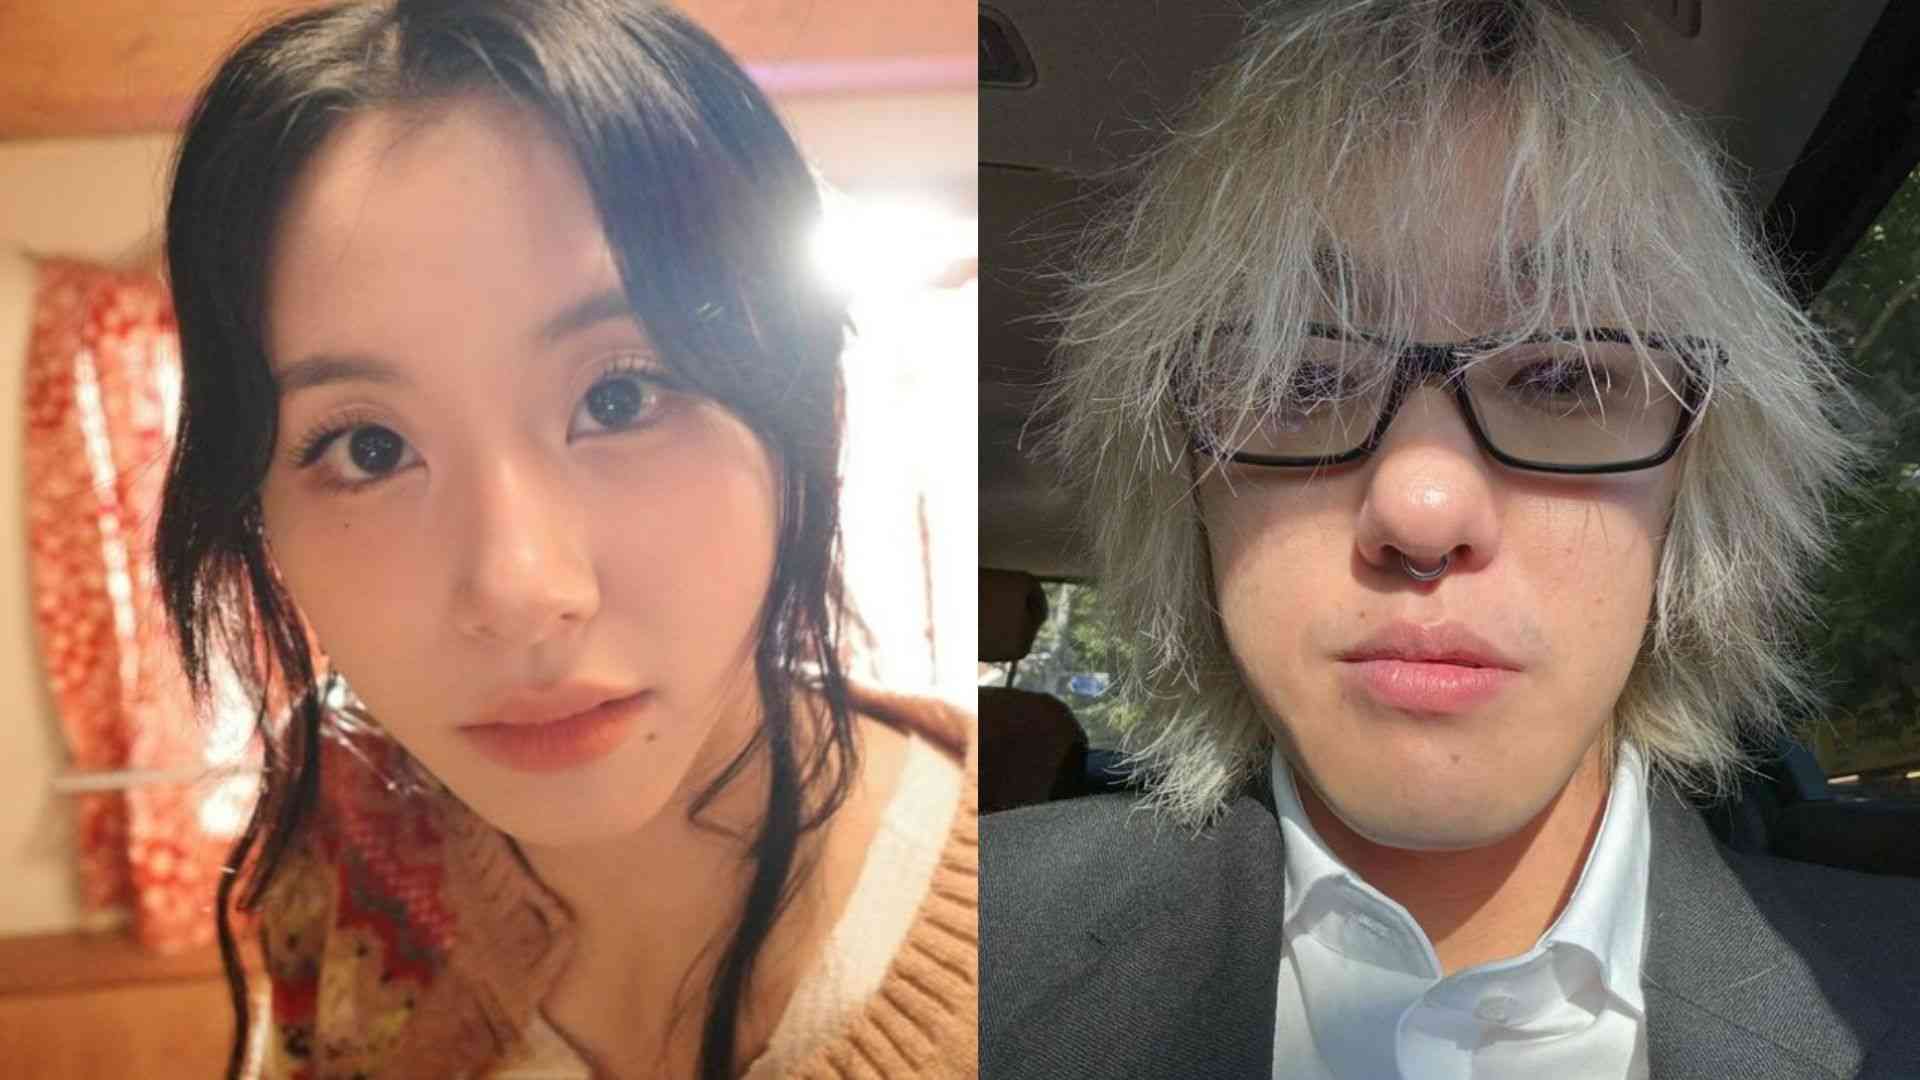 JYP Entertainment confirms TWICE’s Chaeyoung, Zion.T dating